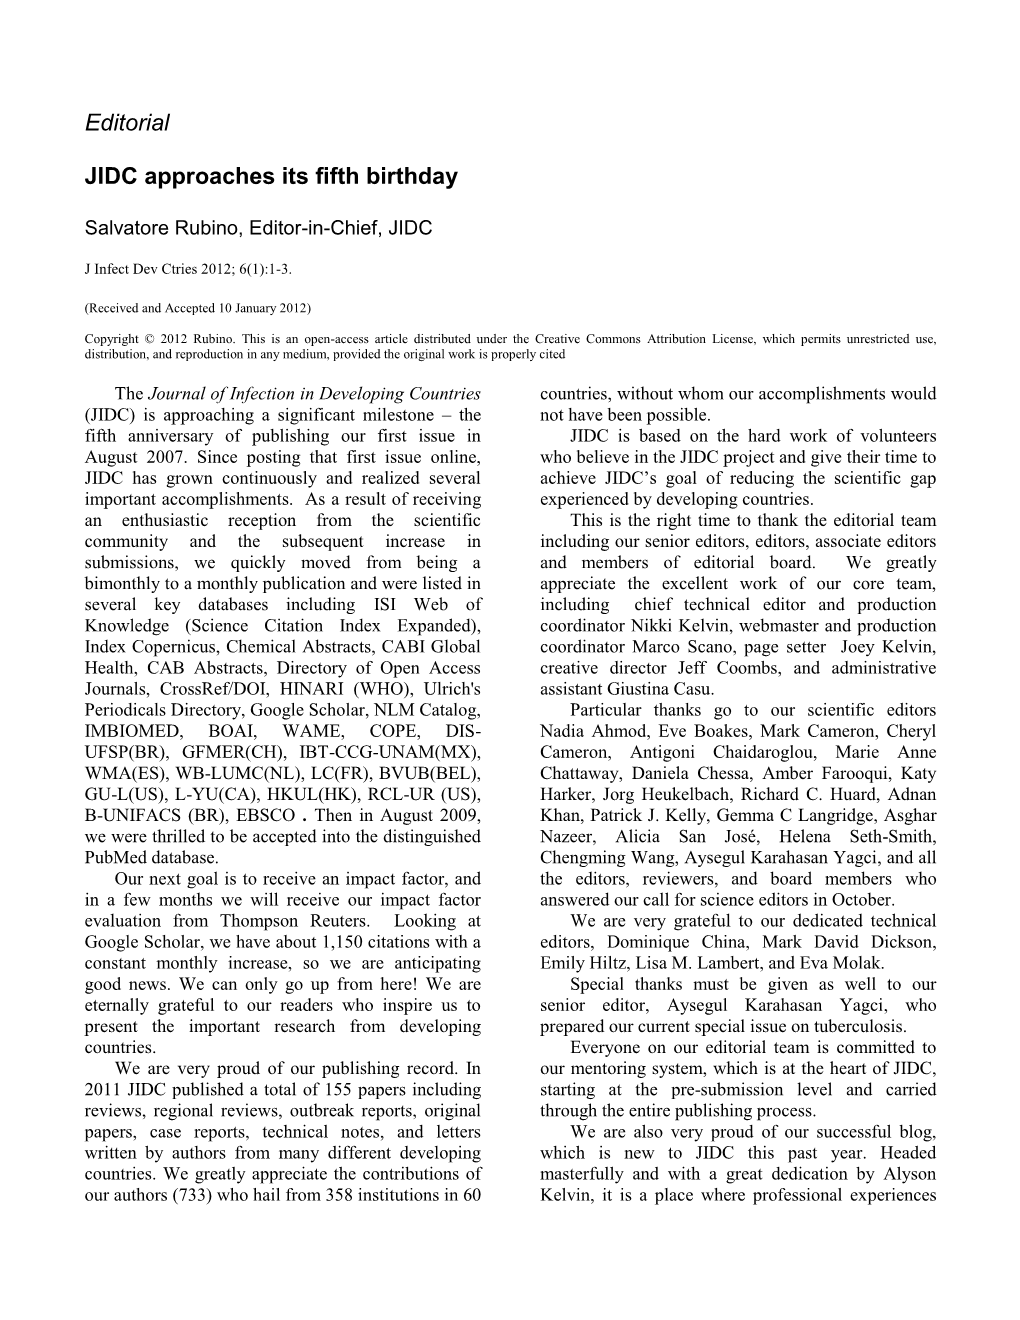 JIDC Approaches Its Fifth Birthday